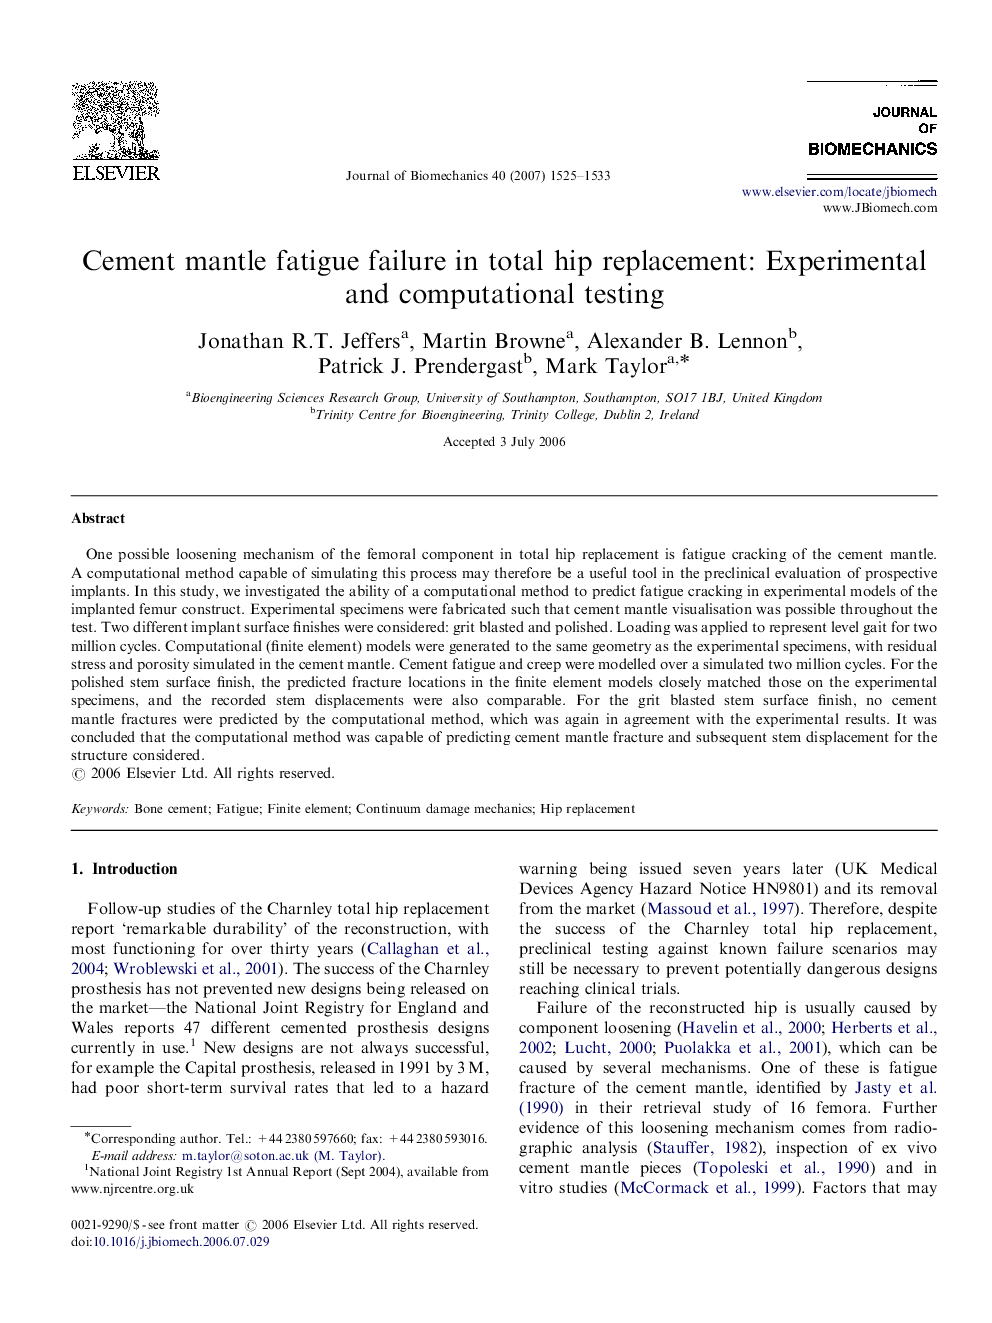 Cement mantle fatigue failure in total hip replacement: Experimental and computational testing